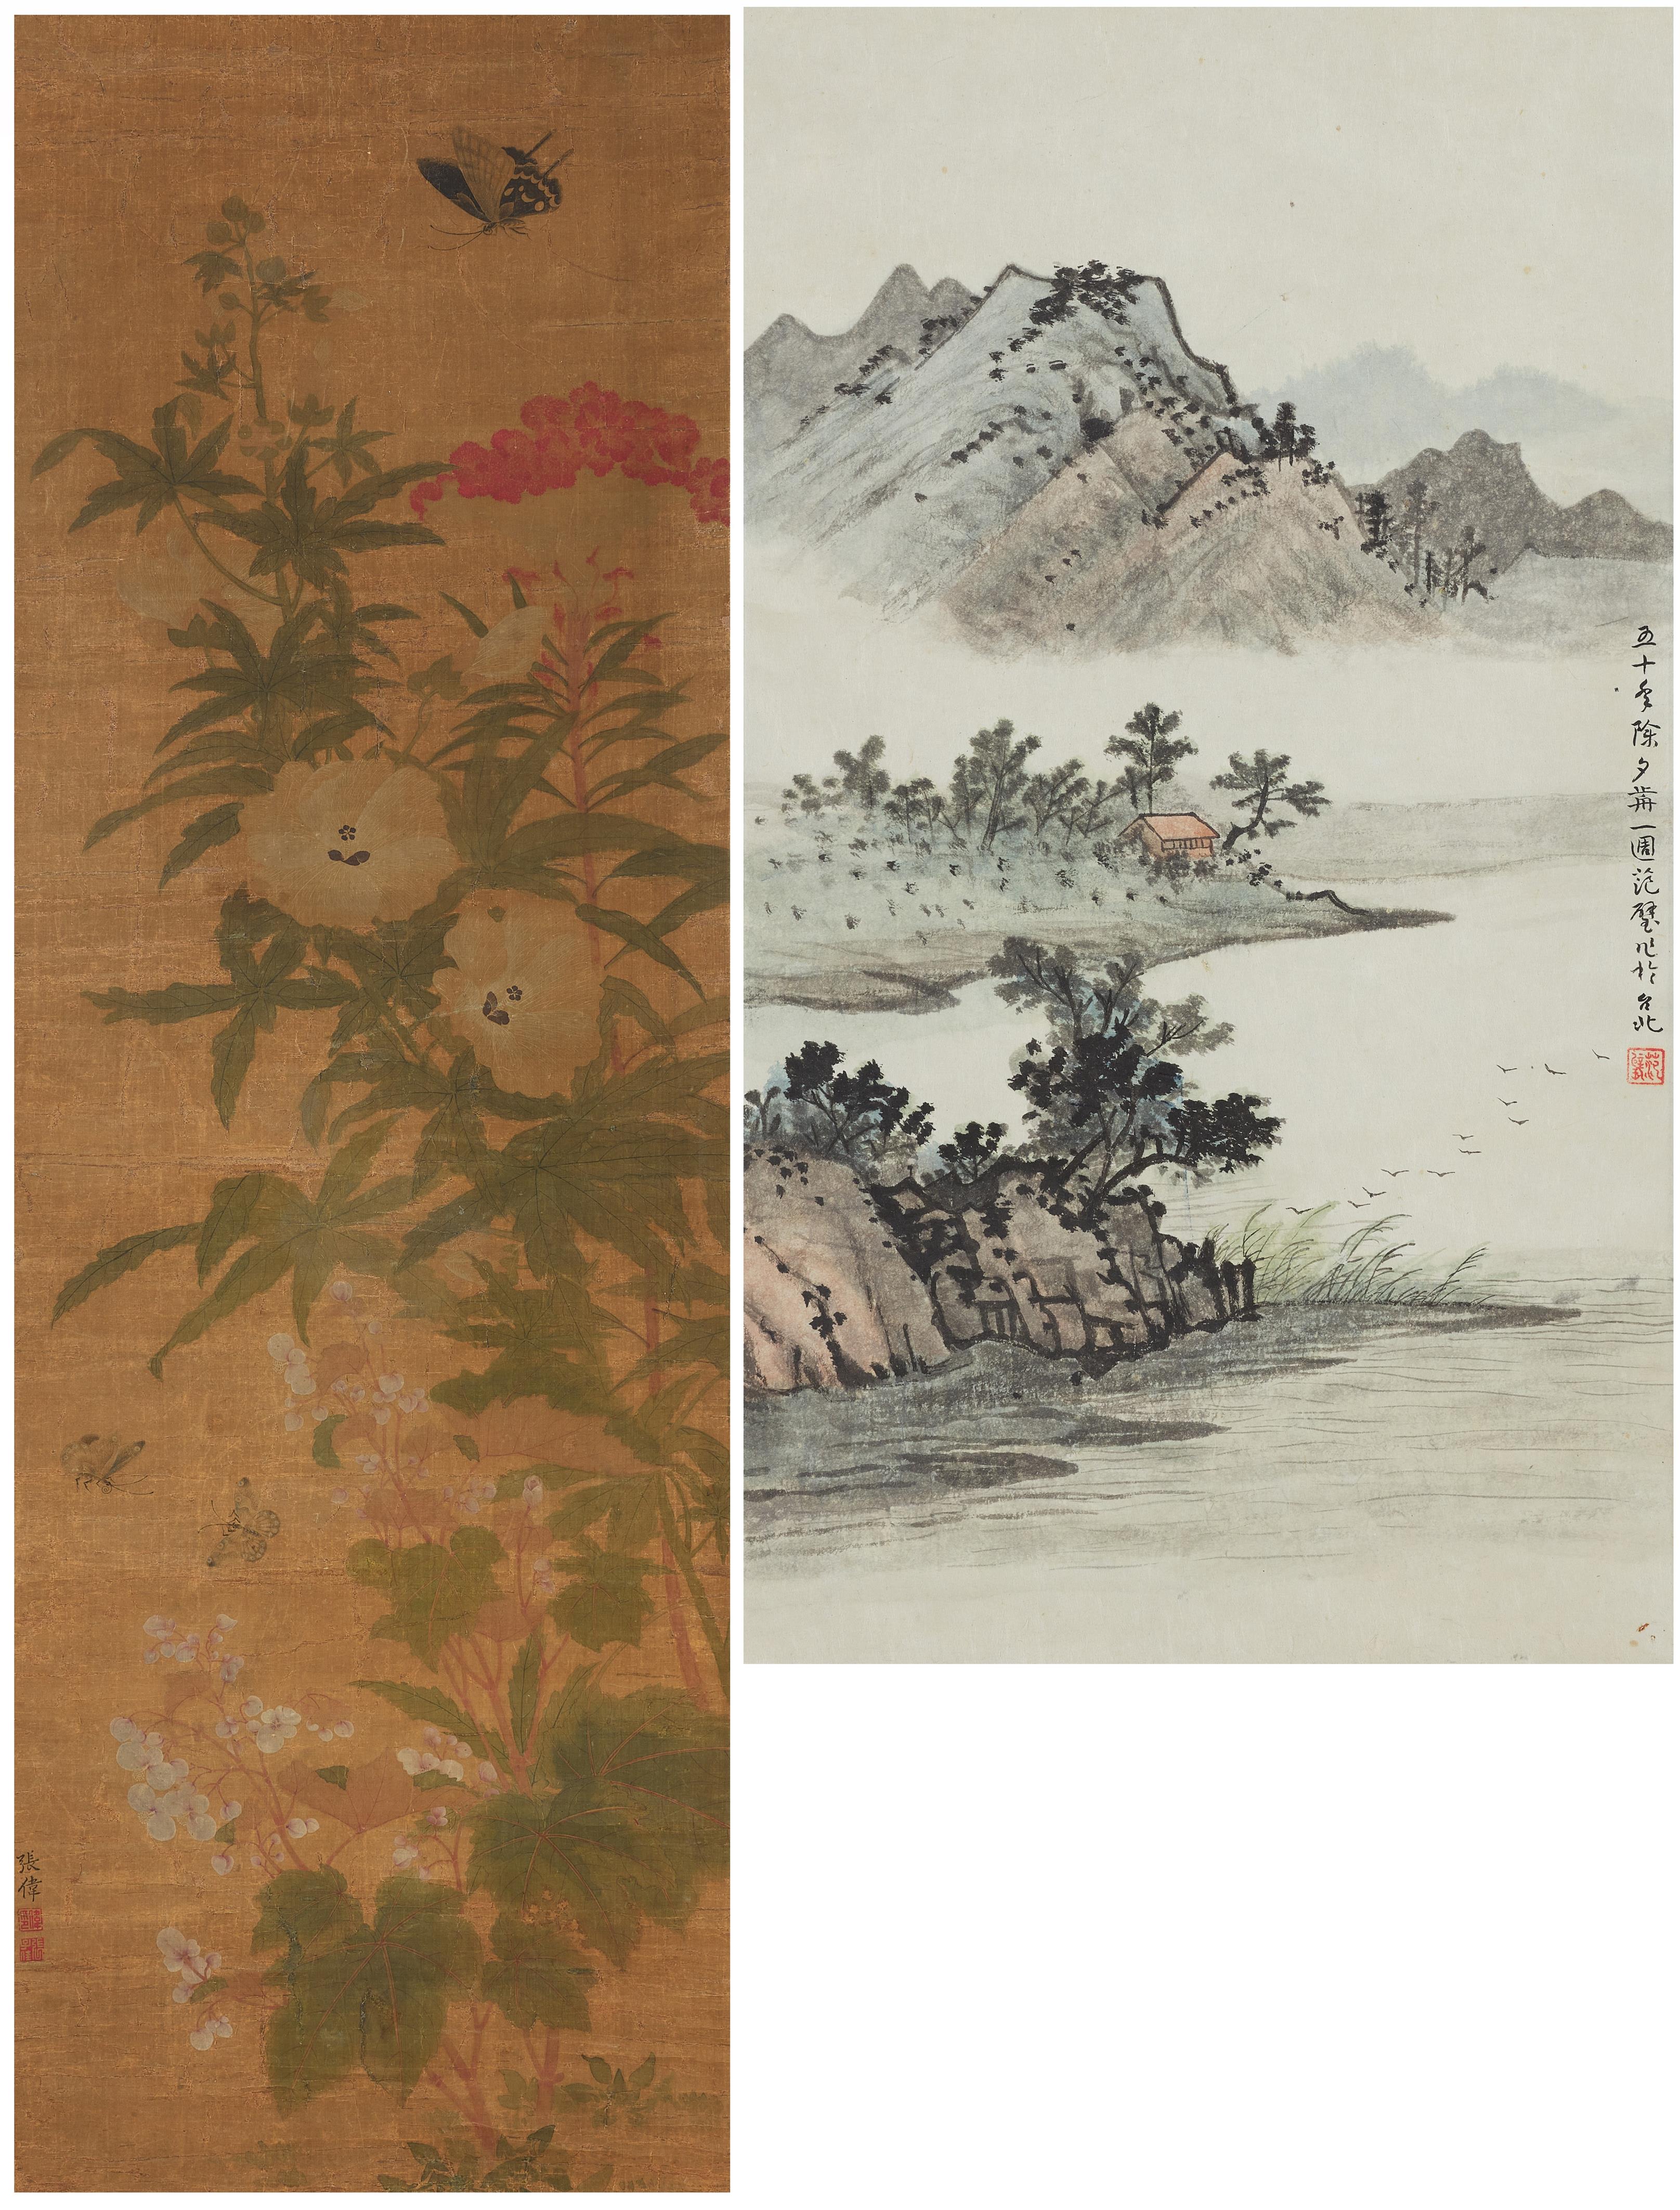 Zhang Wei and
Fan Bi . 19th/20th century - Two hanging scrolls. Ink and colour on paper. a) Butterflies and flowers. Signed Zhang Wei, sealed Wei yin Zhang Wei. b) A mountainous landscape. Signed and sealed Fan Bi. (2) - image-3